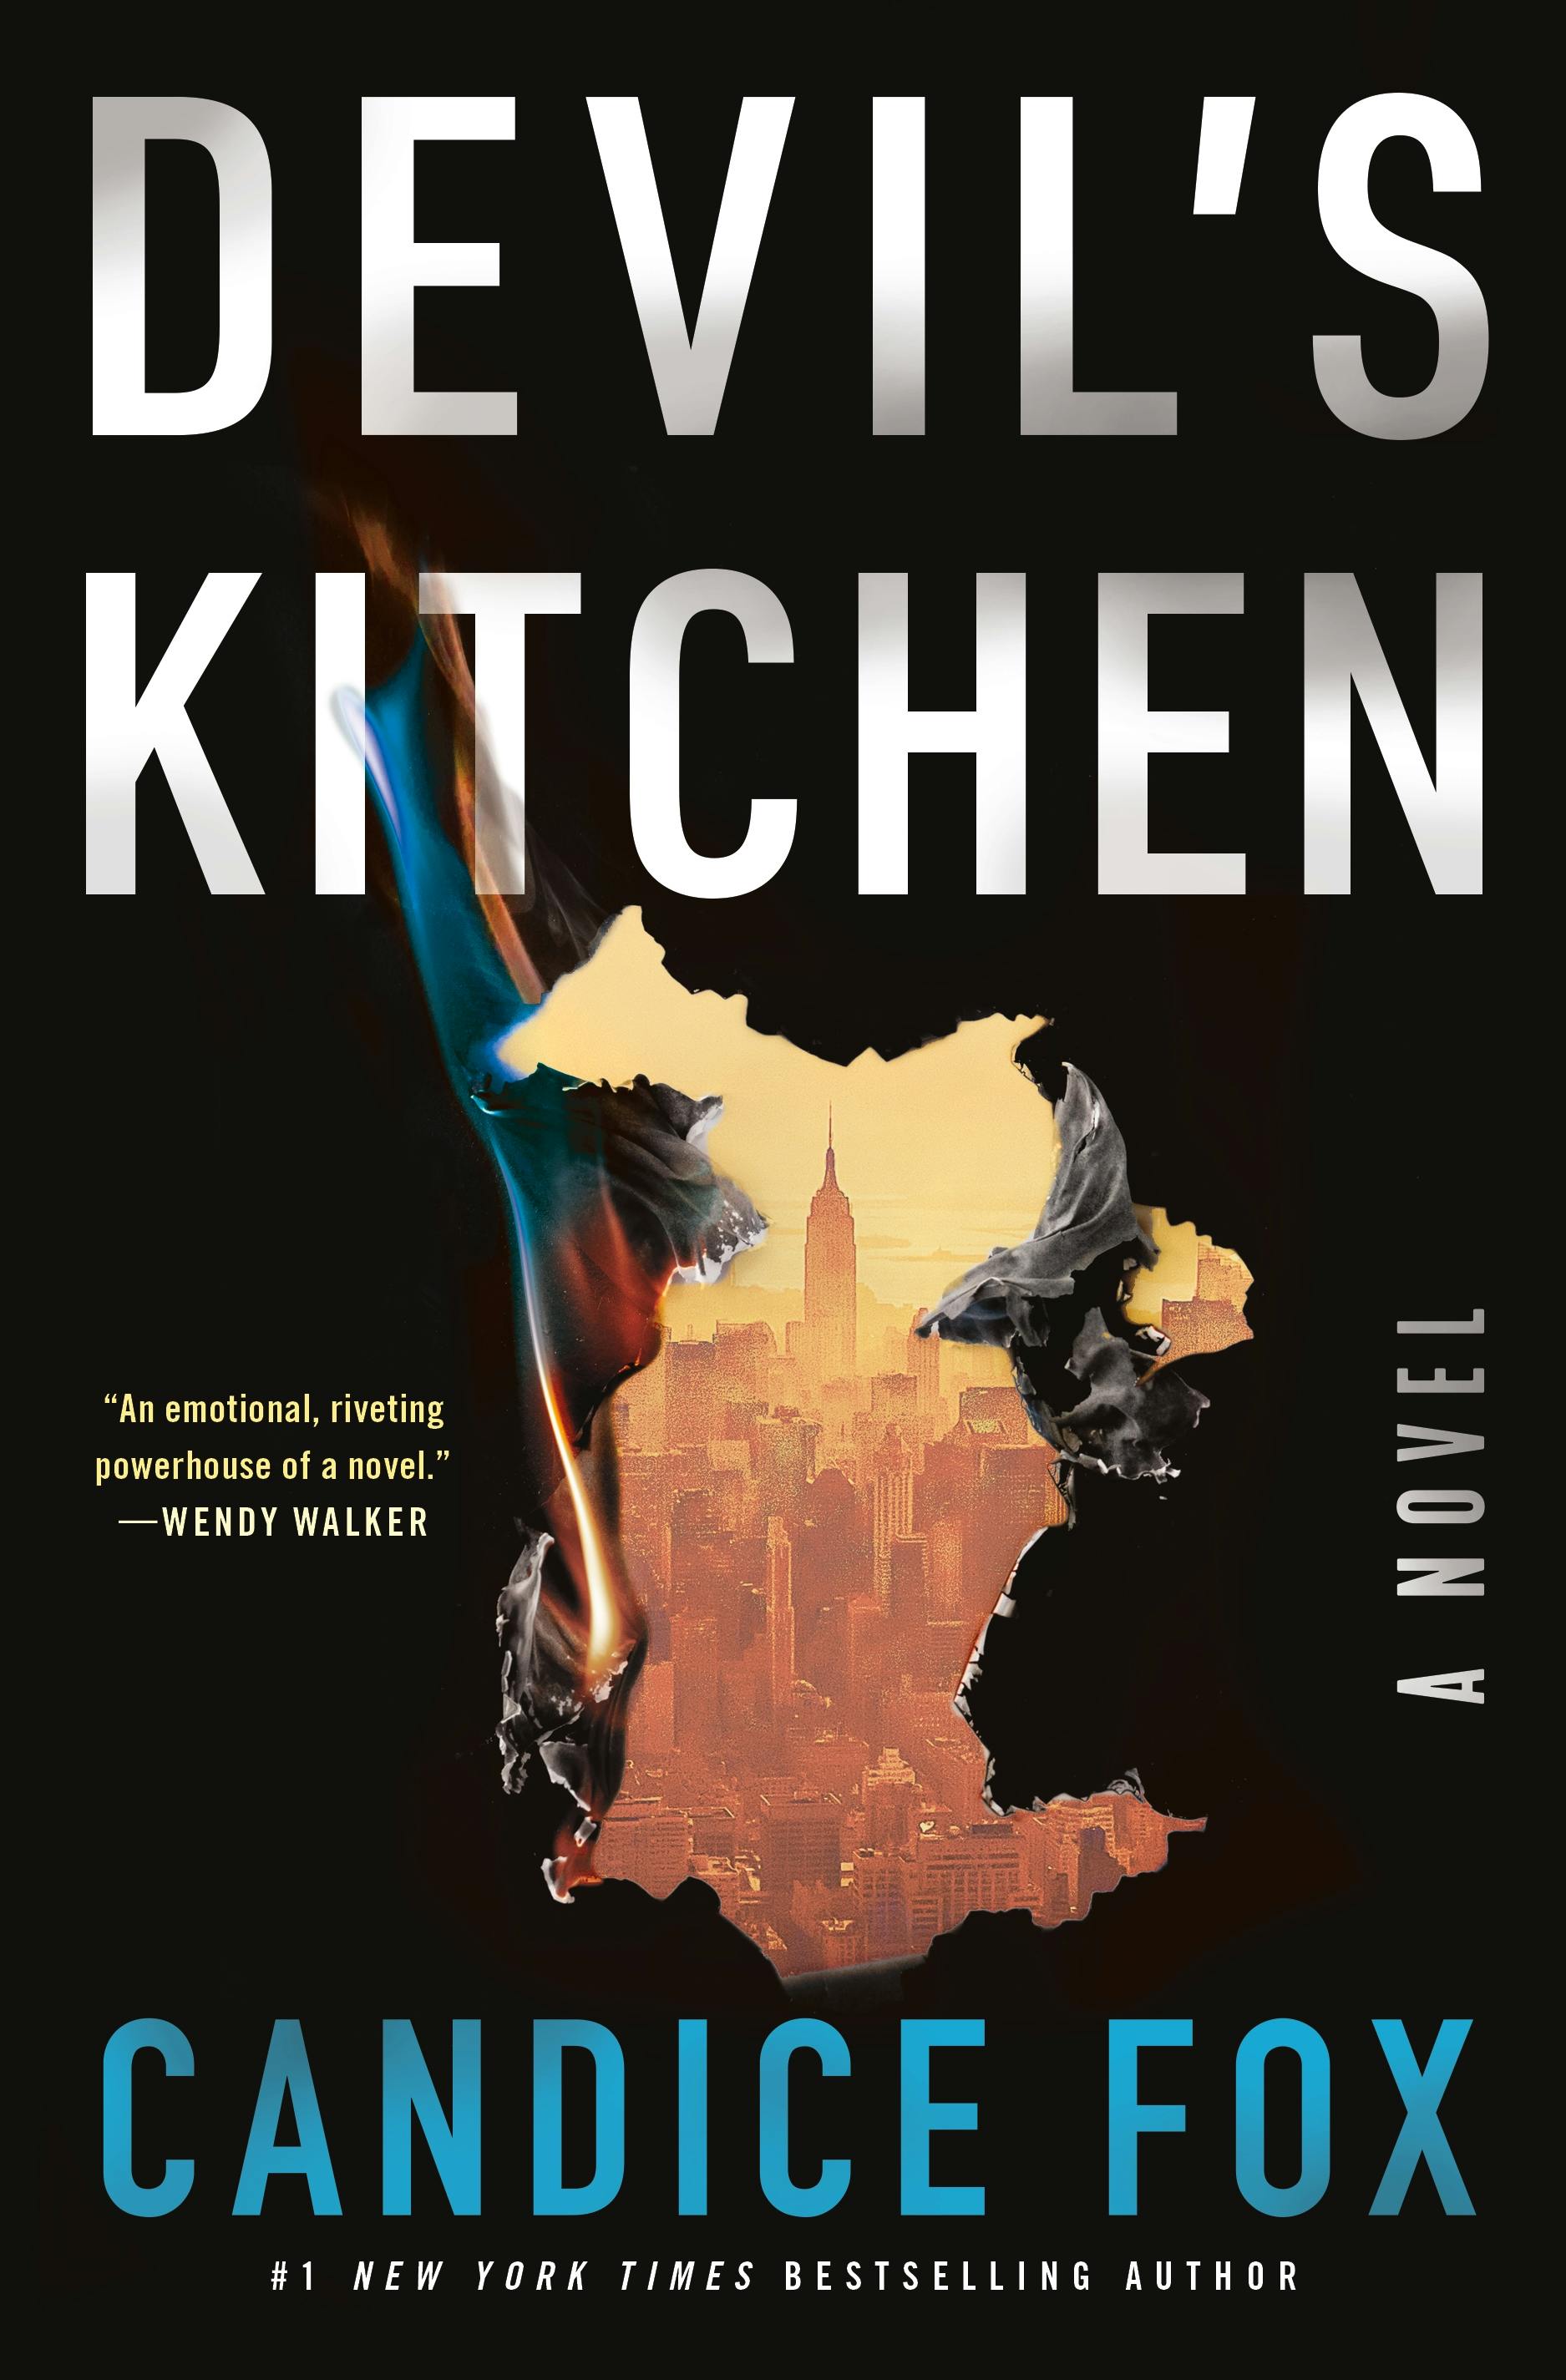 Cover for the book titled as: Devil's Kitchen